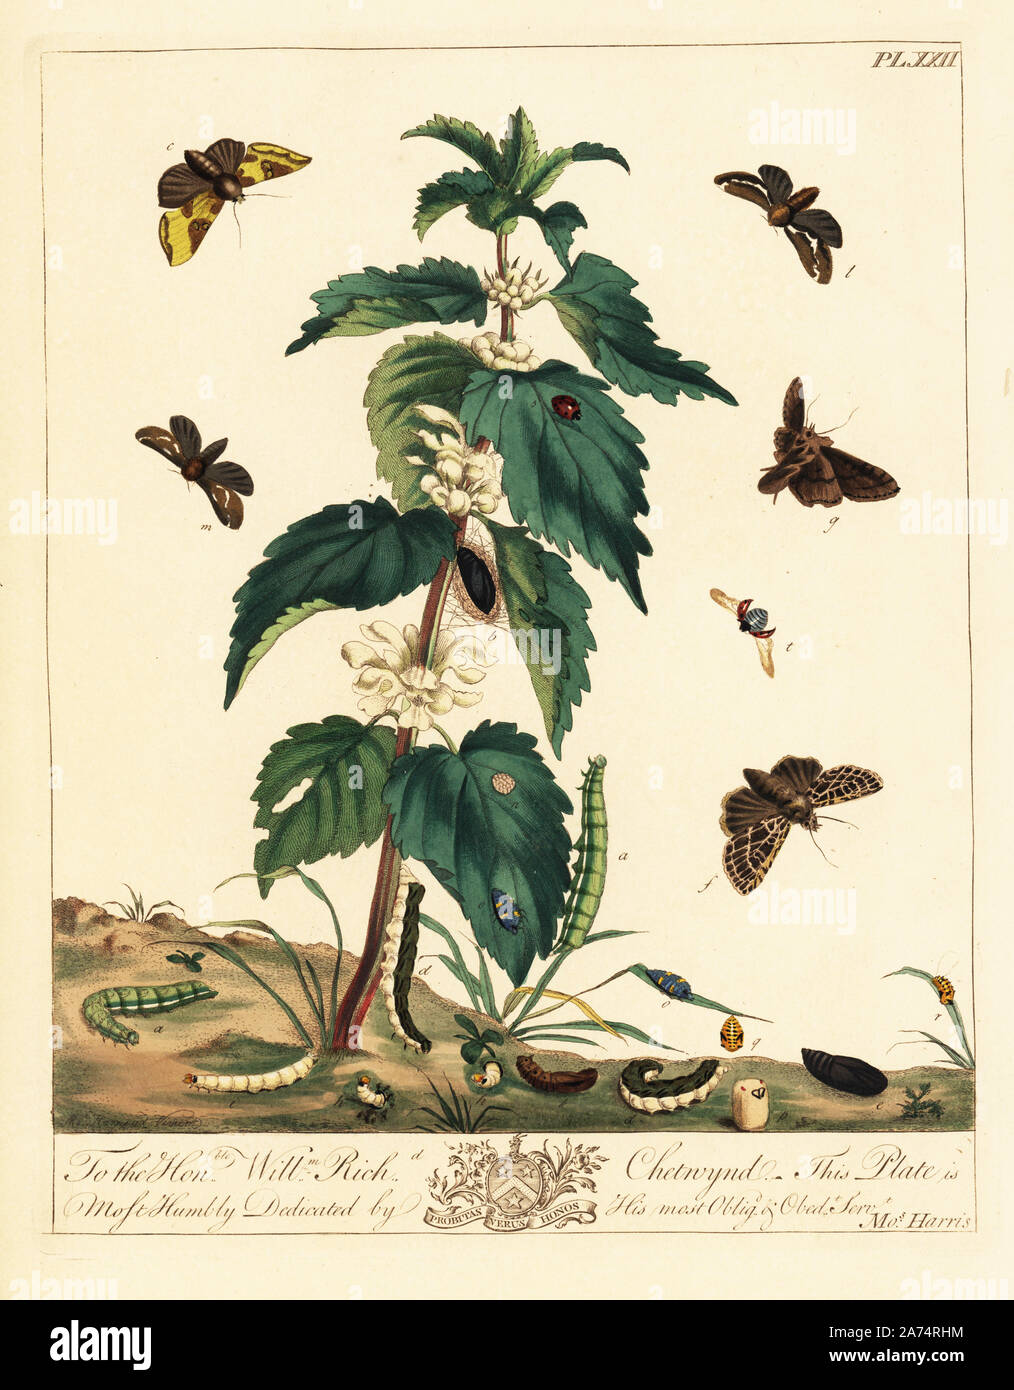 Burnished brass moth, Diachrysia chrysitis, dark gothic, Naenia typica, orange swift, Triodia sylvina, and seven spotted ladybird, Coccinella septempunctata, on a stinging nettle plant, Urtica dioica. Handcoloured lithograph after an illustration by Moses Harris from 'The Aurelian; a Natural History of English Moths and Butterflies,' new edition edited by J. O. Westwood, published by Henry Bohn, London, 1840. Stock Photo